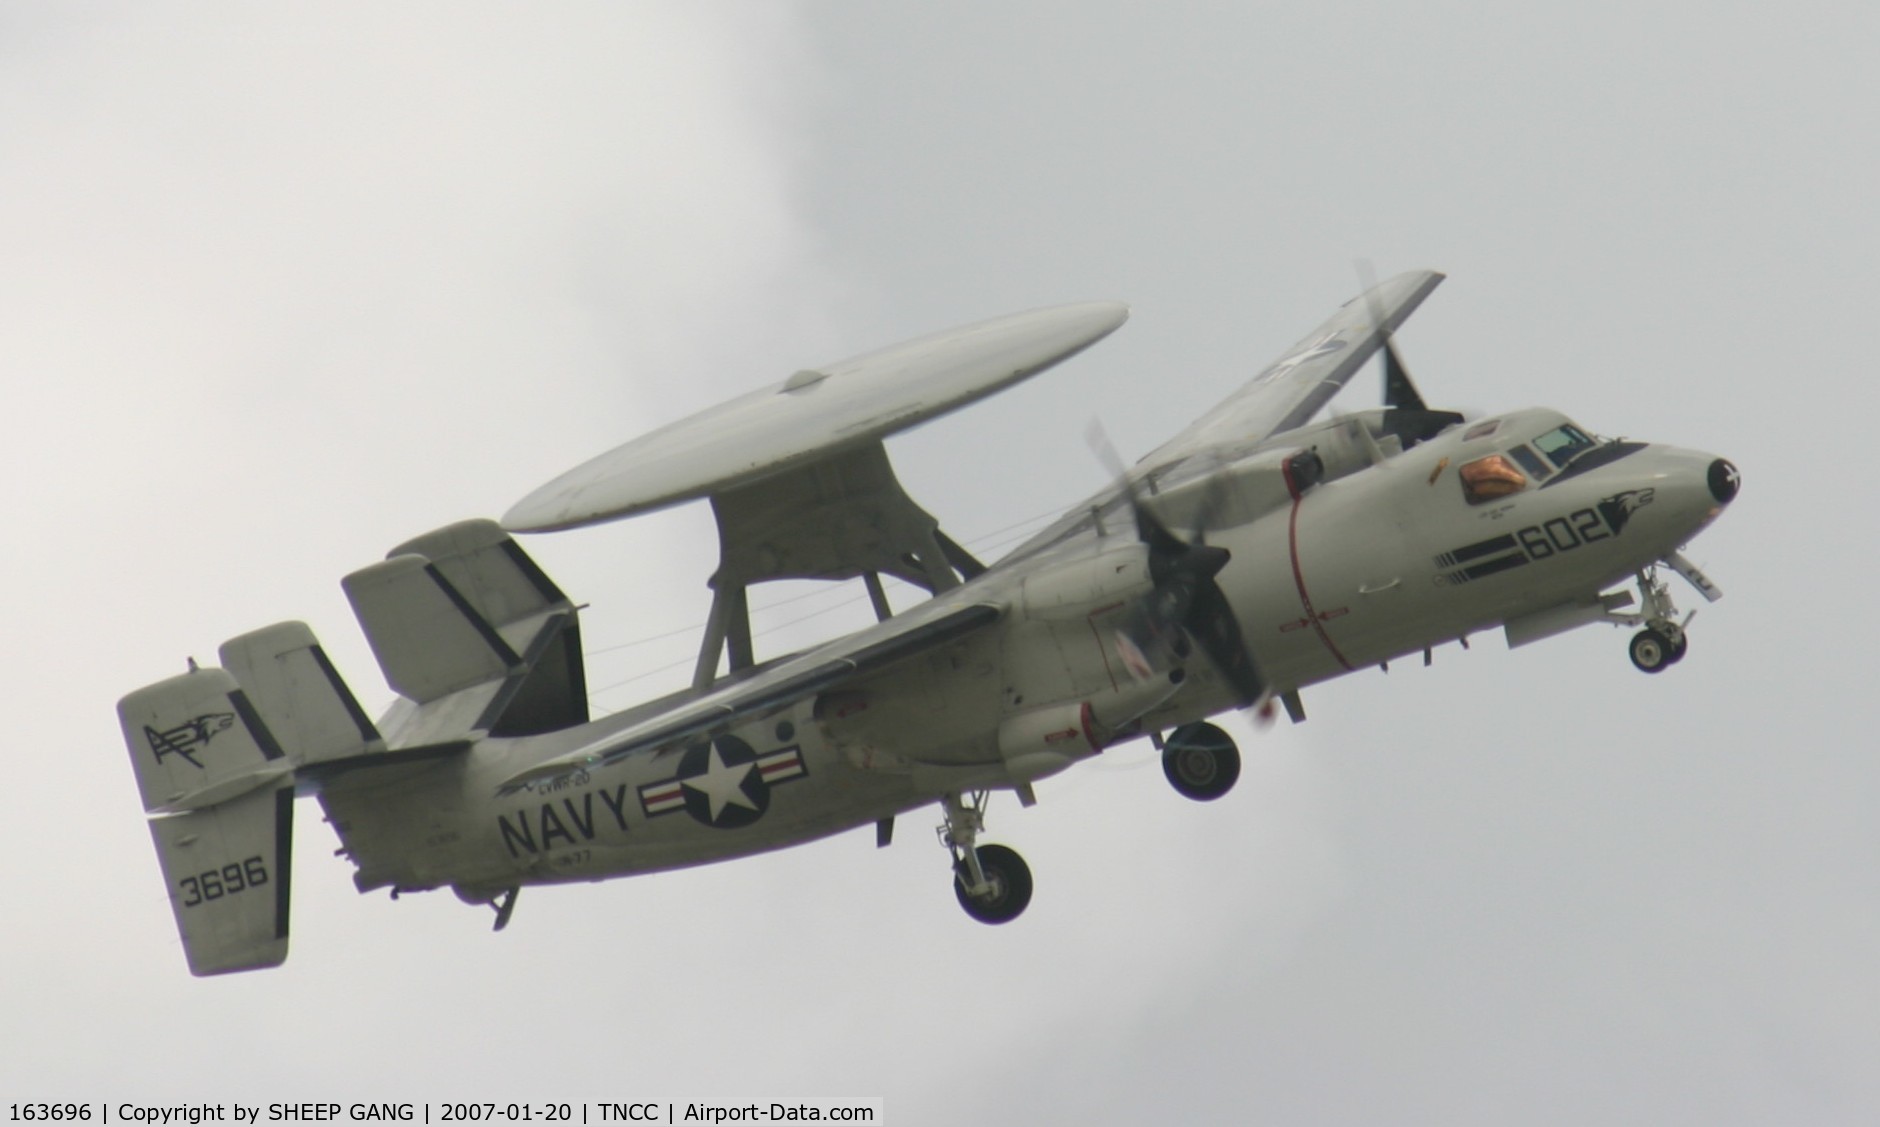 163696, Grumman E-2C Hawkeye Group 1 C/N A132, doing a low pass showing off there aircraft